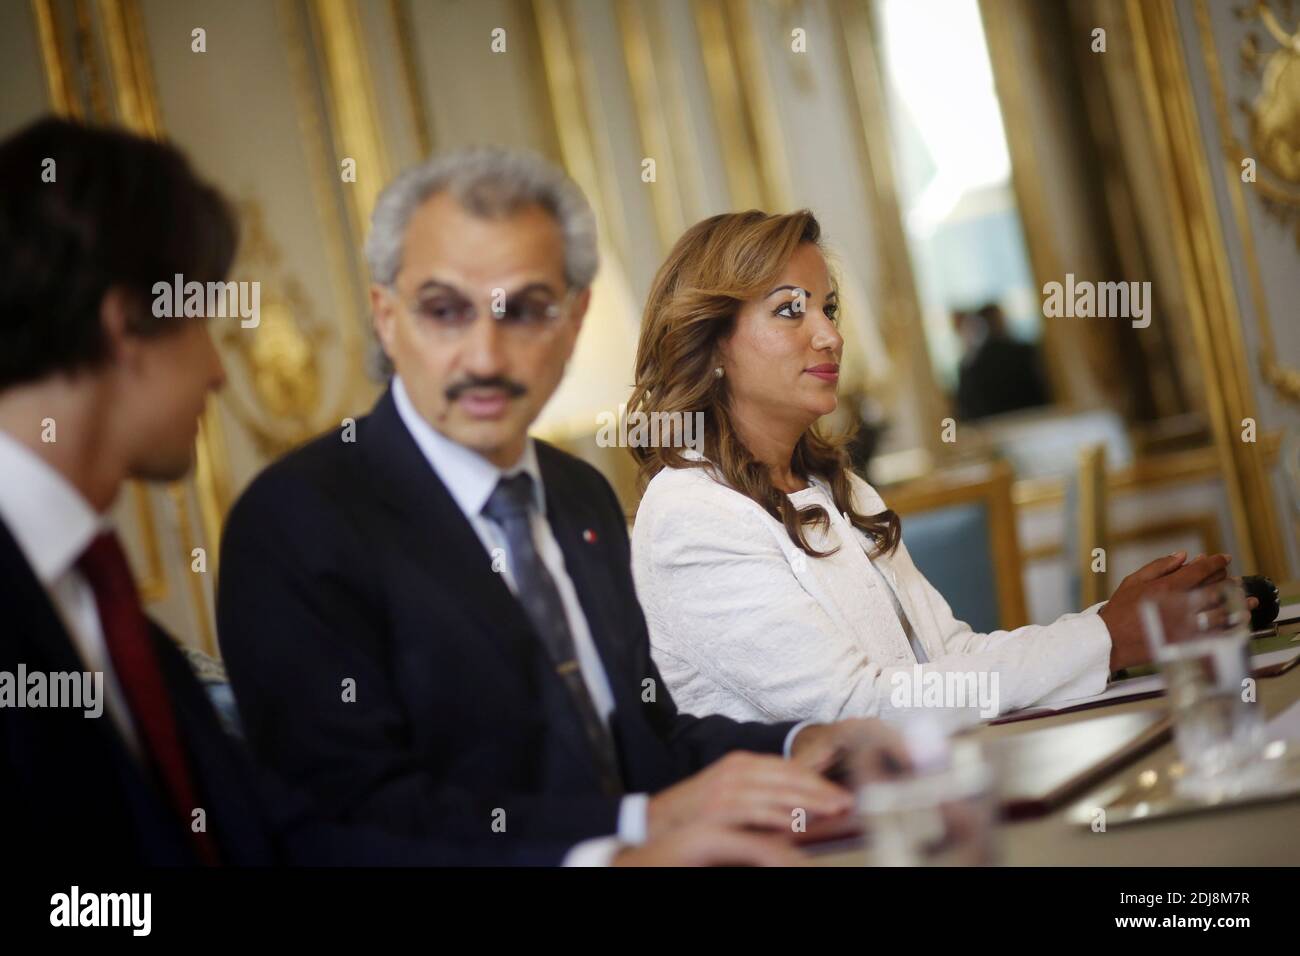 Saudi business magnate, investor, and philanthropist Prince Al-Waleed Bin Talal bin Abdulaziz al Saud (Al-Walid ben Talal ben Abdelaziz Al Saoud) flanked by his Assisant Executive Manager for Travel and External Affairs Department Hassna Alturki during a meeting with French President Francois Hollande at the Elysee Palace in Paris, France on September 8, 2016. Photo by Denis Allard/Pool/ABACAPRESS.COM Stock Photo